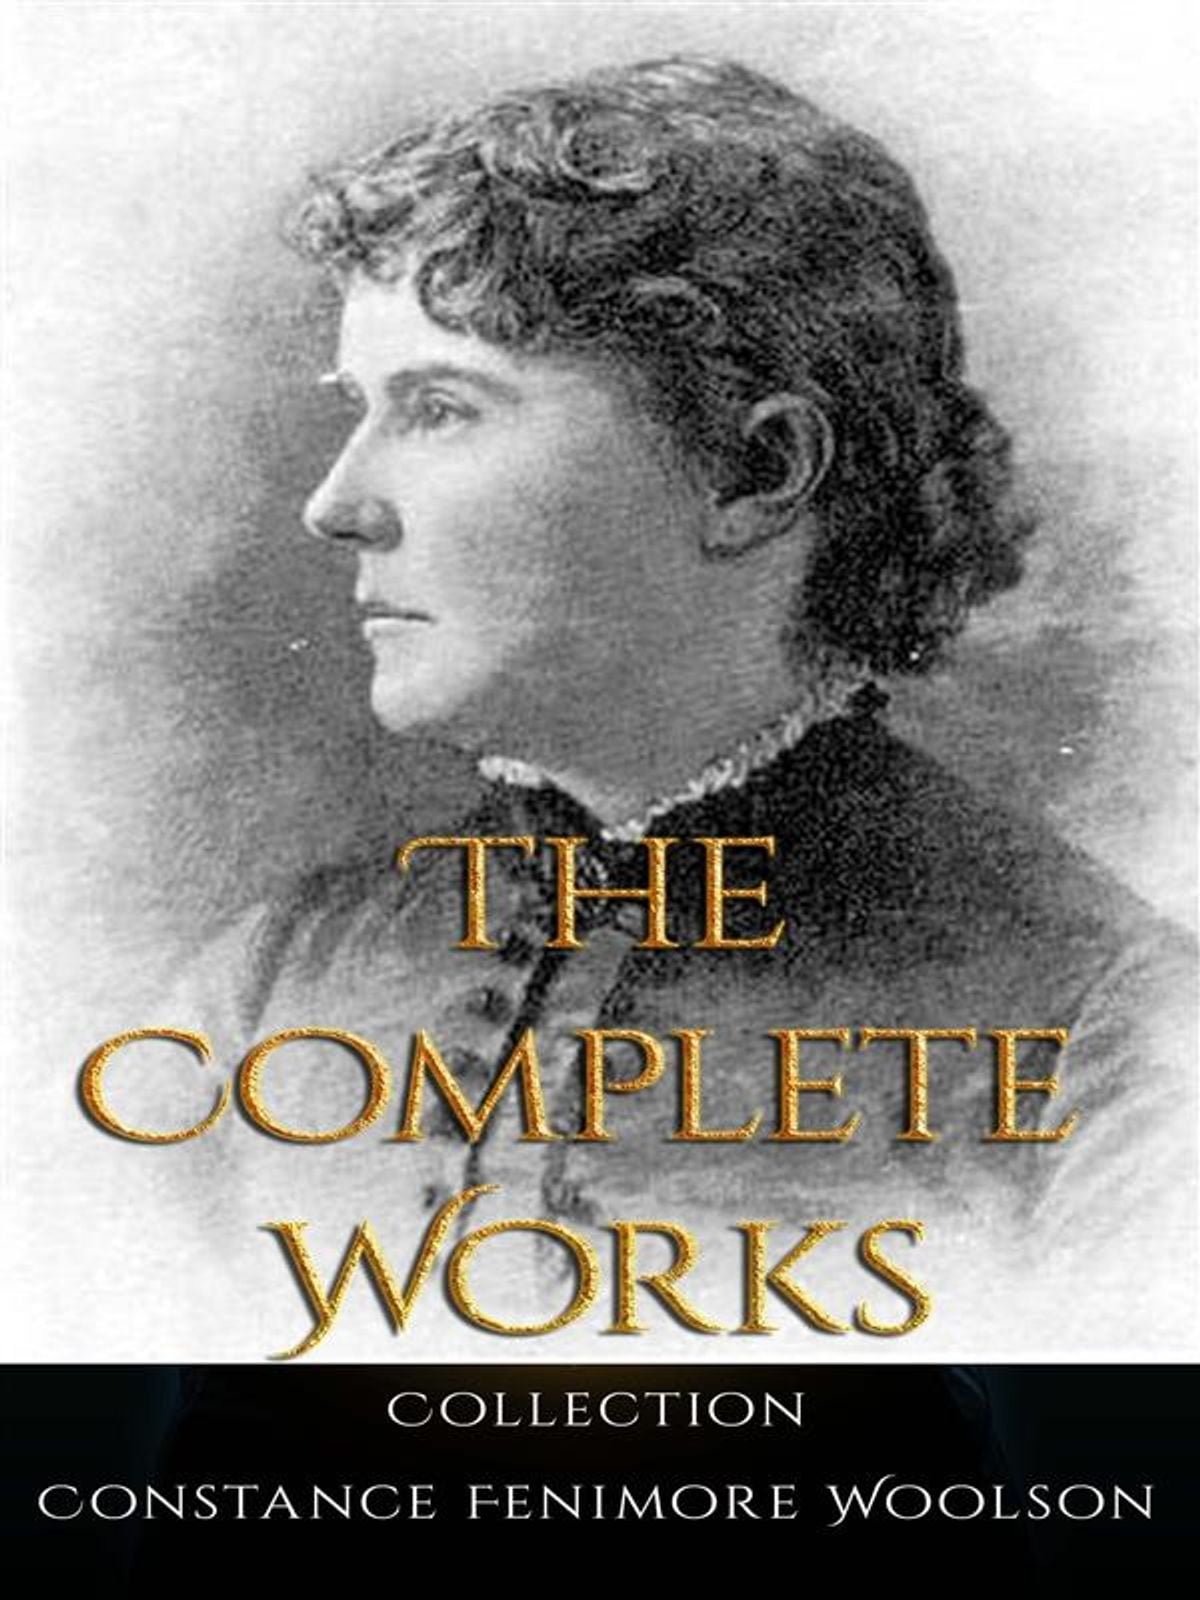 anne by constance fenimore woolson